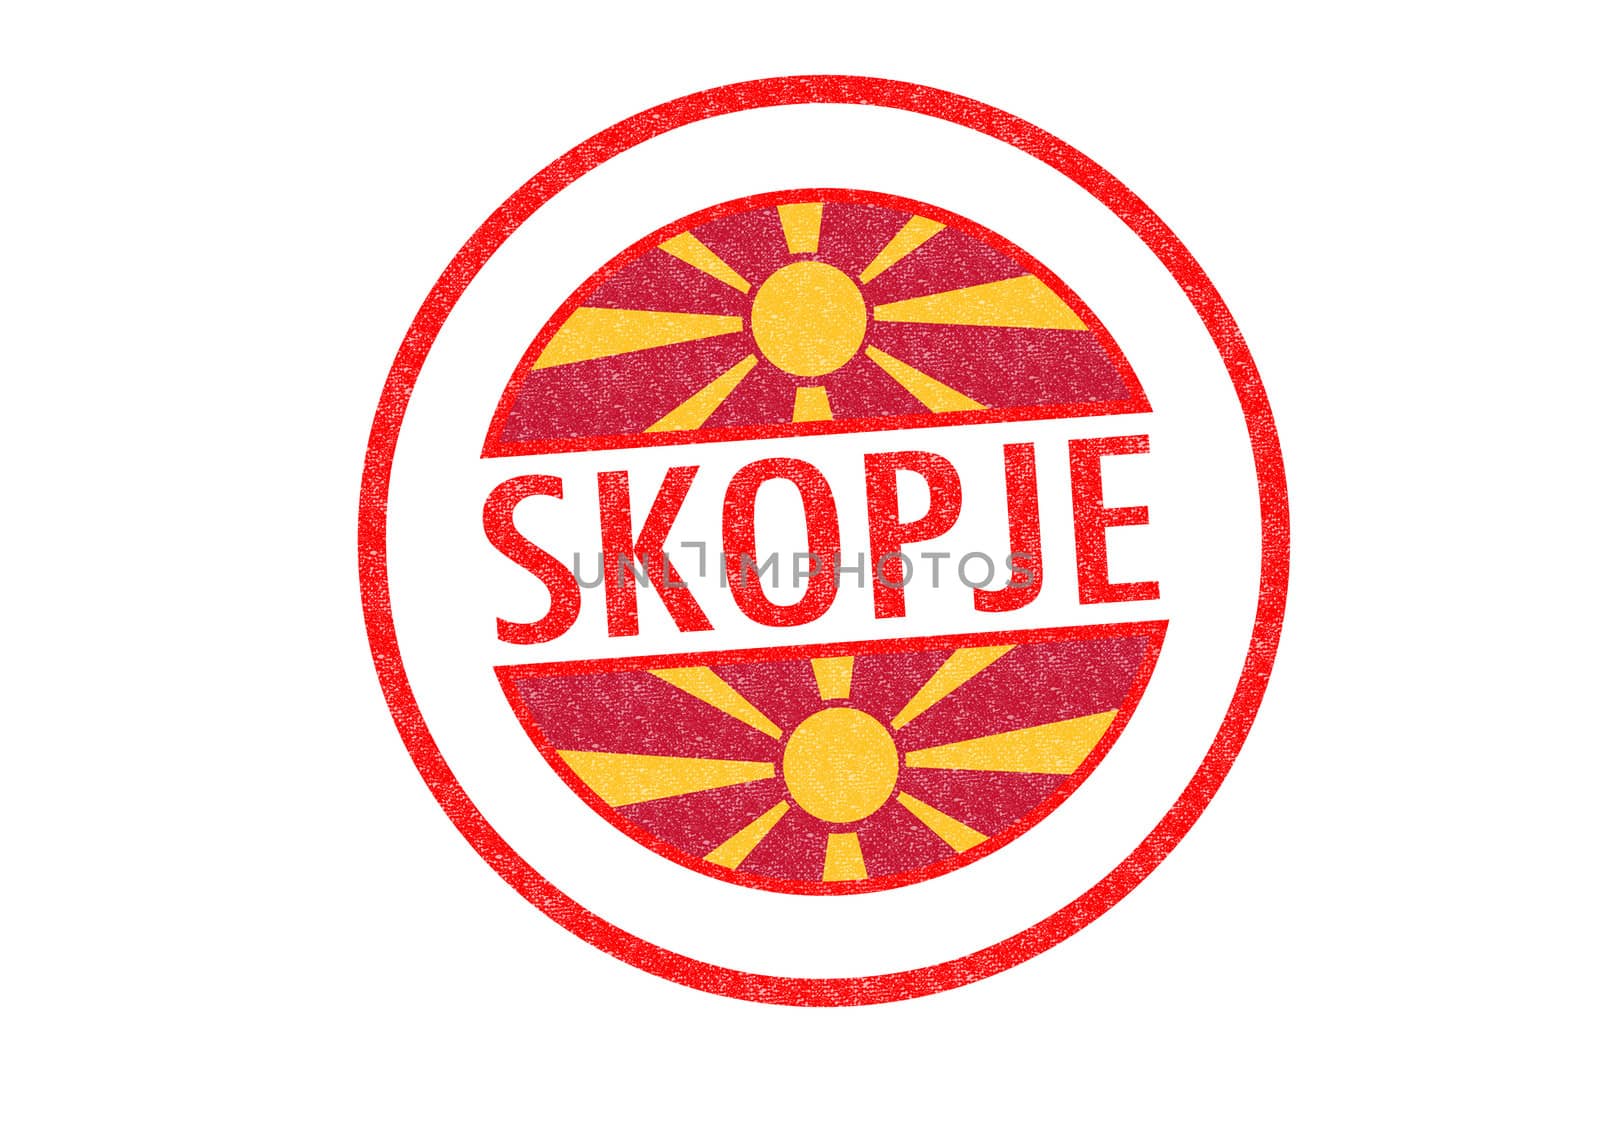 Passport-style SKOPJE (capital of Macedonia) rubber stamp over a white background.